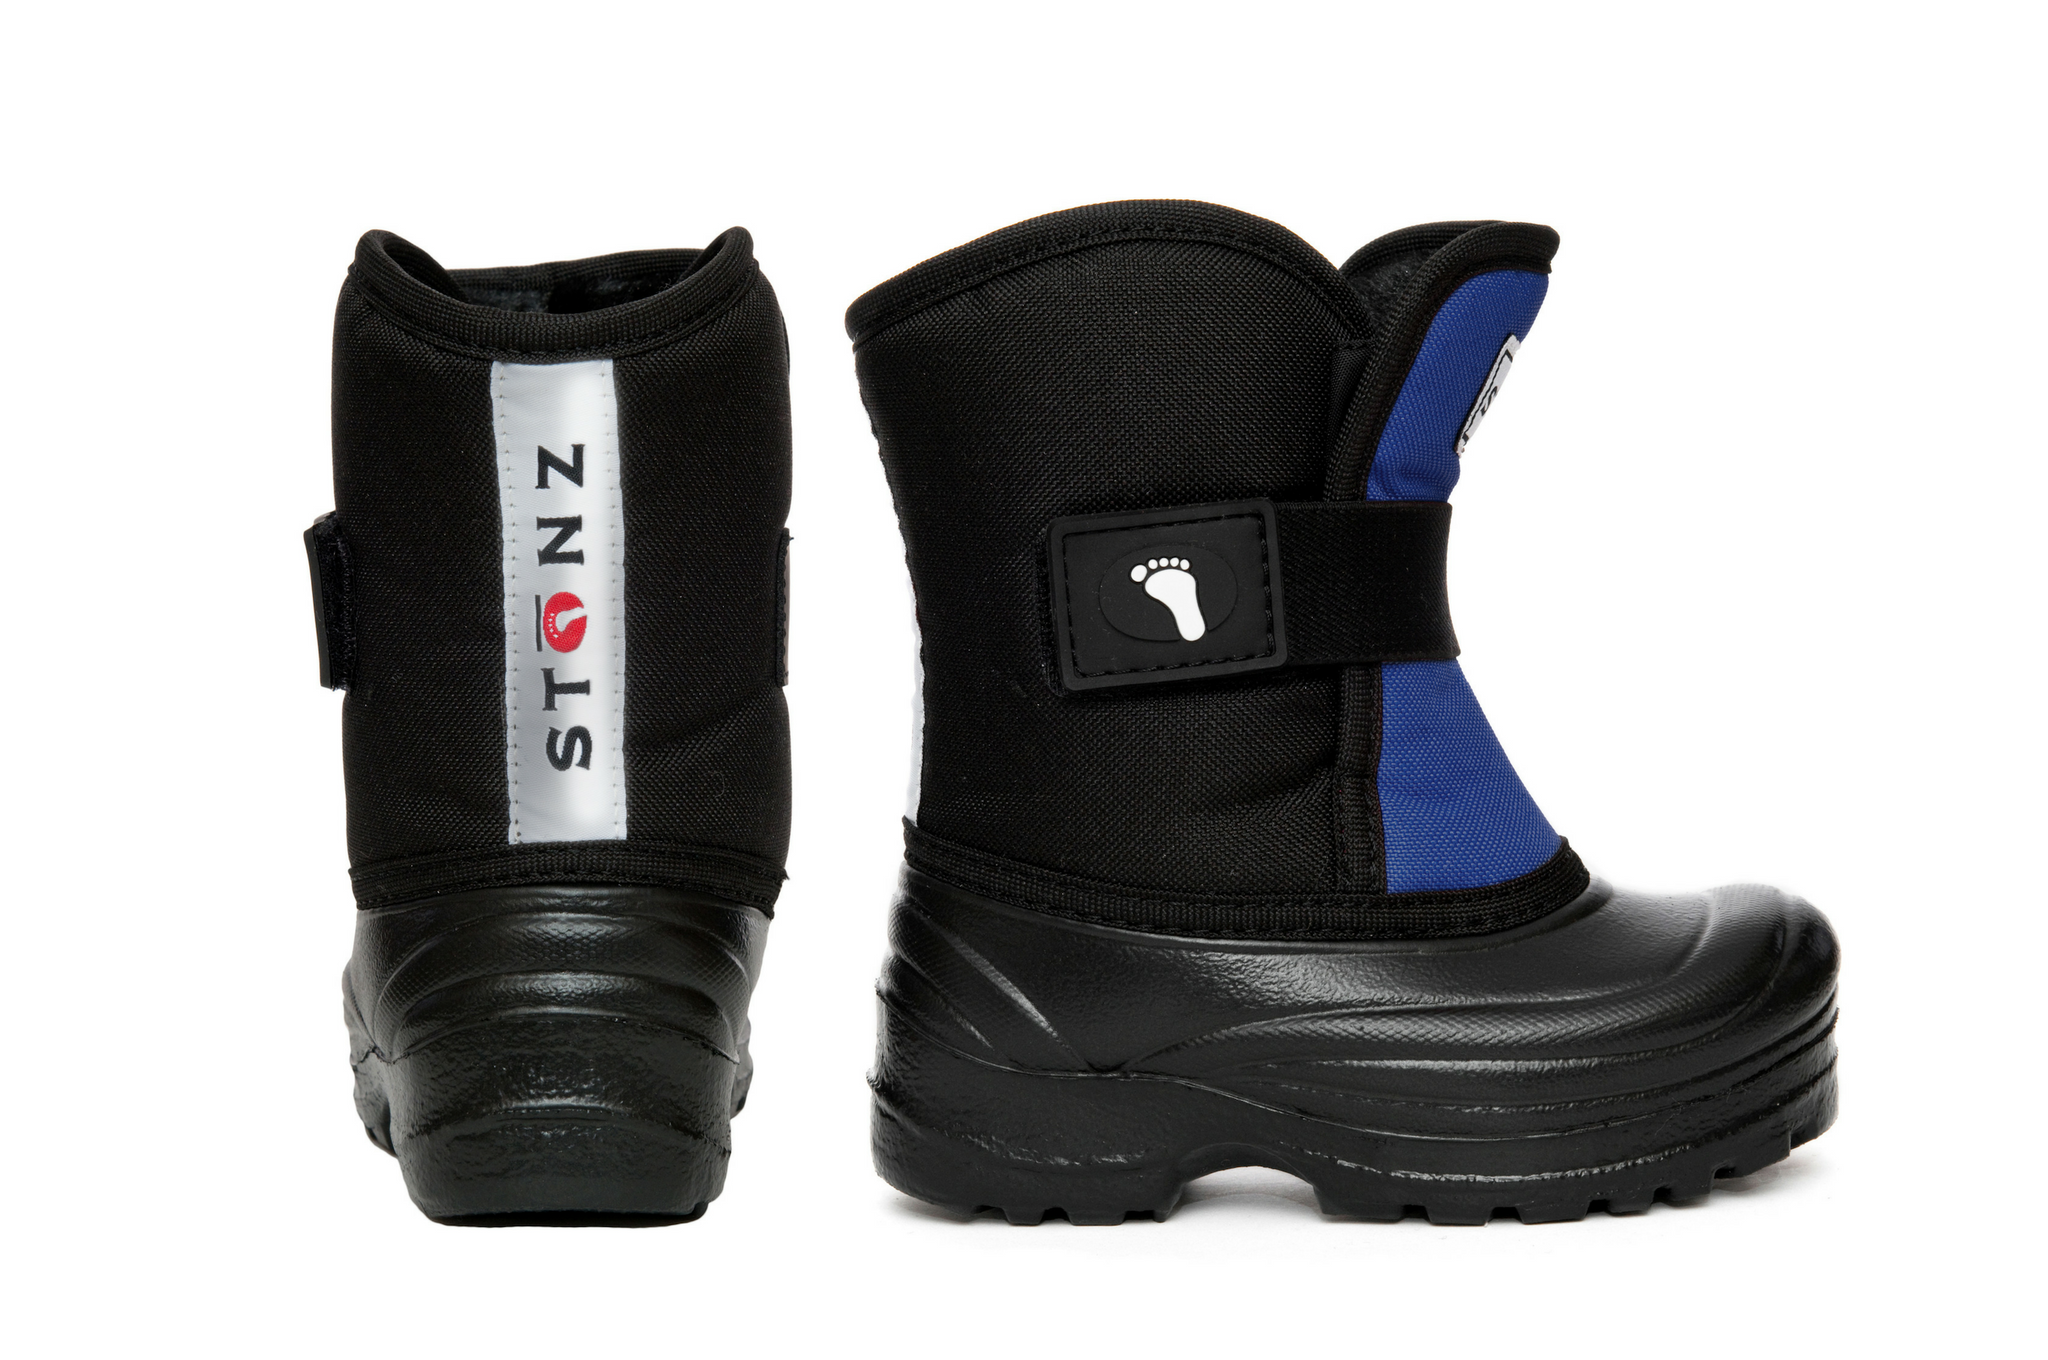 Grey/Black Boots Toddlers Stonz for | Reflective Weather-resistant Scout Shoes - - Winter |